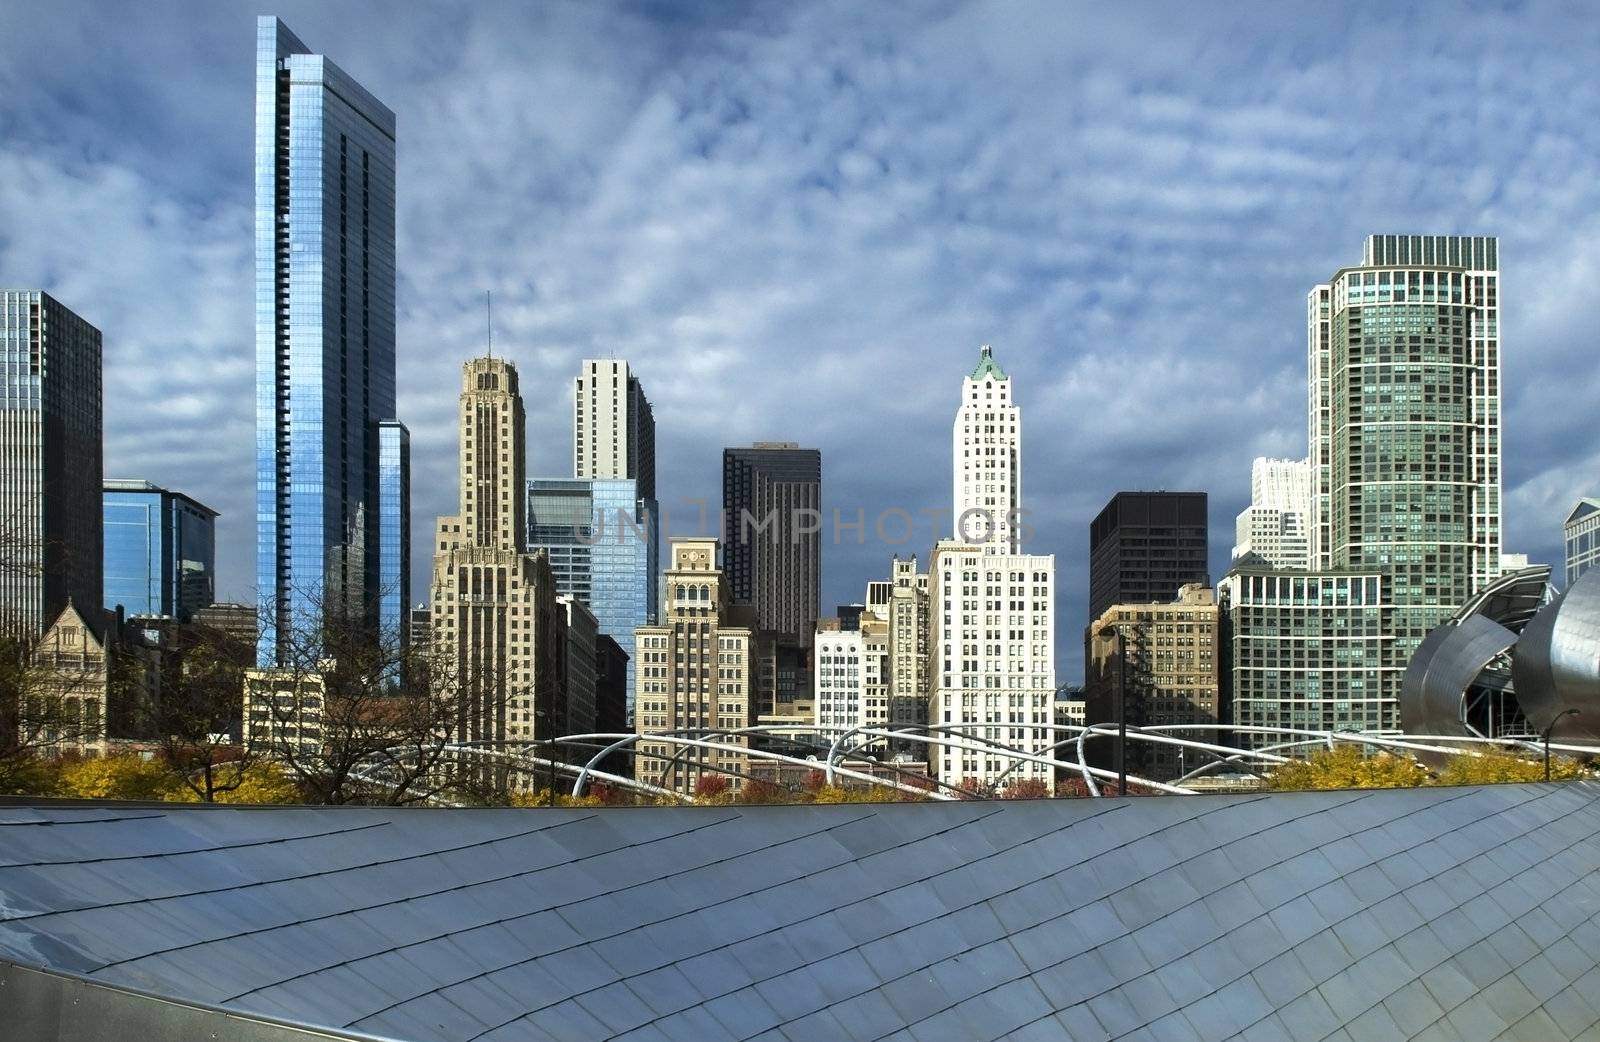 Chicago high-rise buildings by irisphoto4